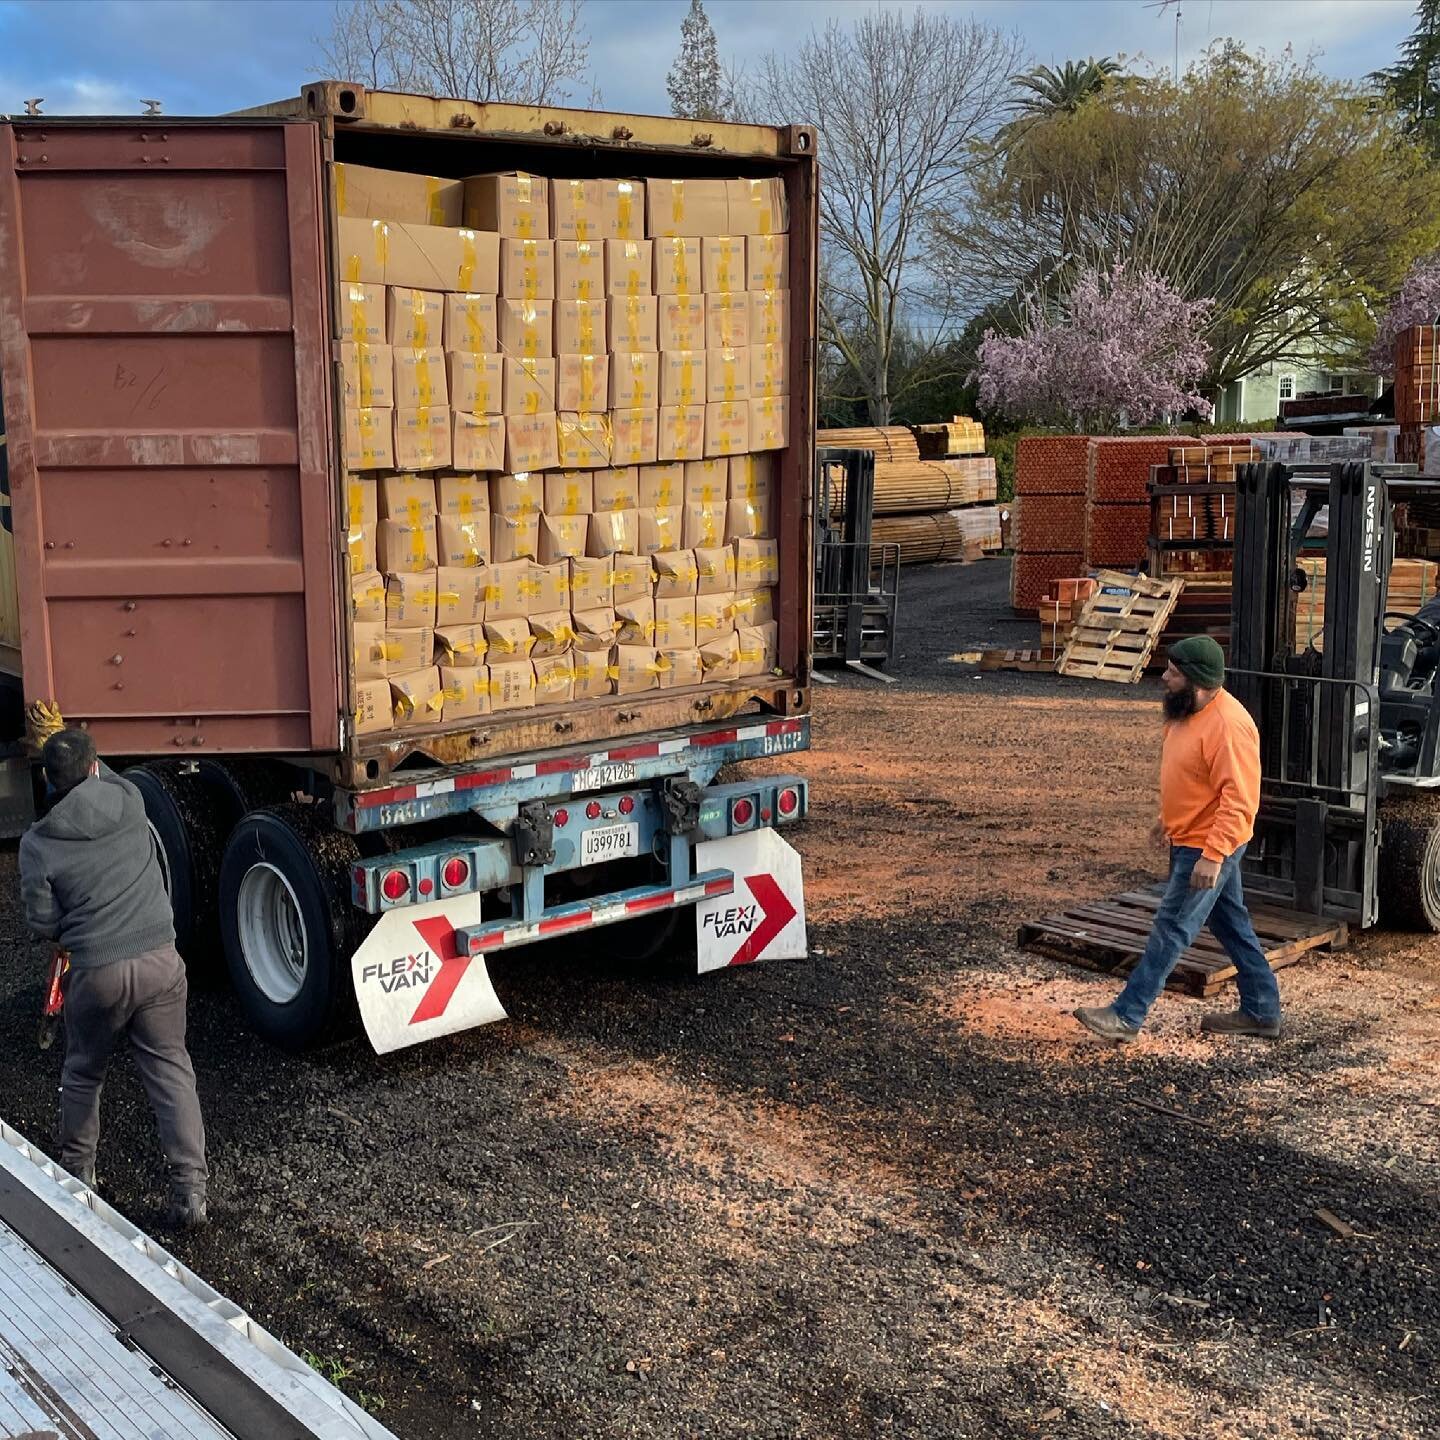 It&rsquo;s all hands on deck when we get a container in the yard! They are always packed to the gills and it seems like they go on forever. Good way to start the day! #workhardplayhard #caag #wholesalenursery #aandgagsupply #nurserysupplies #agricult